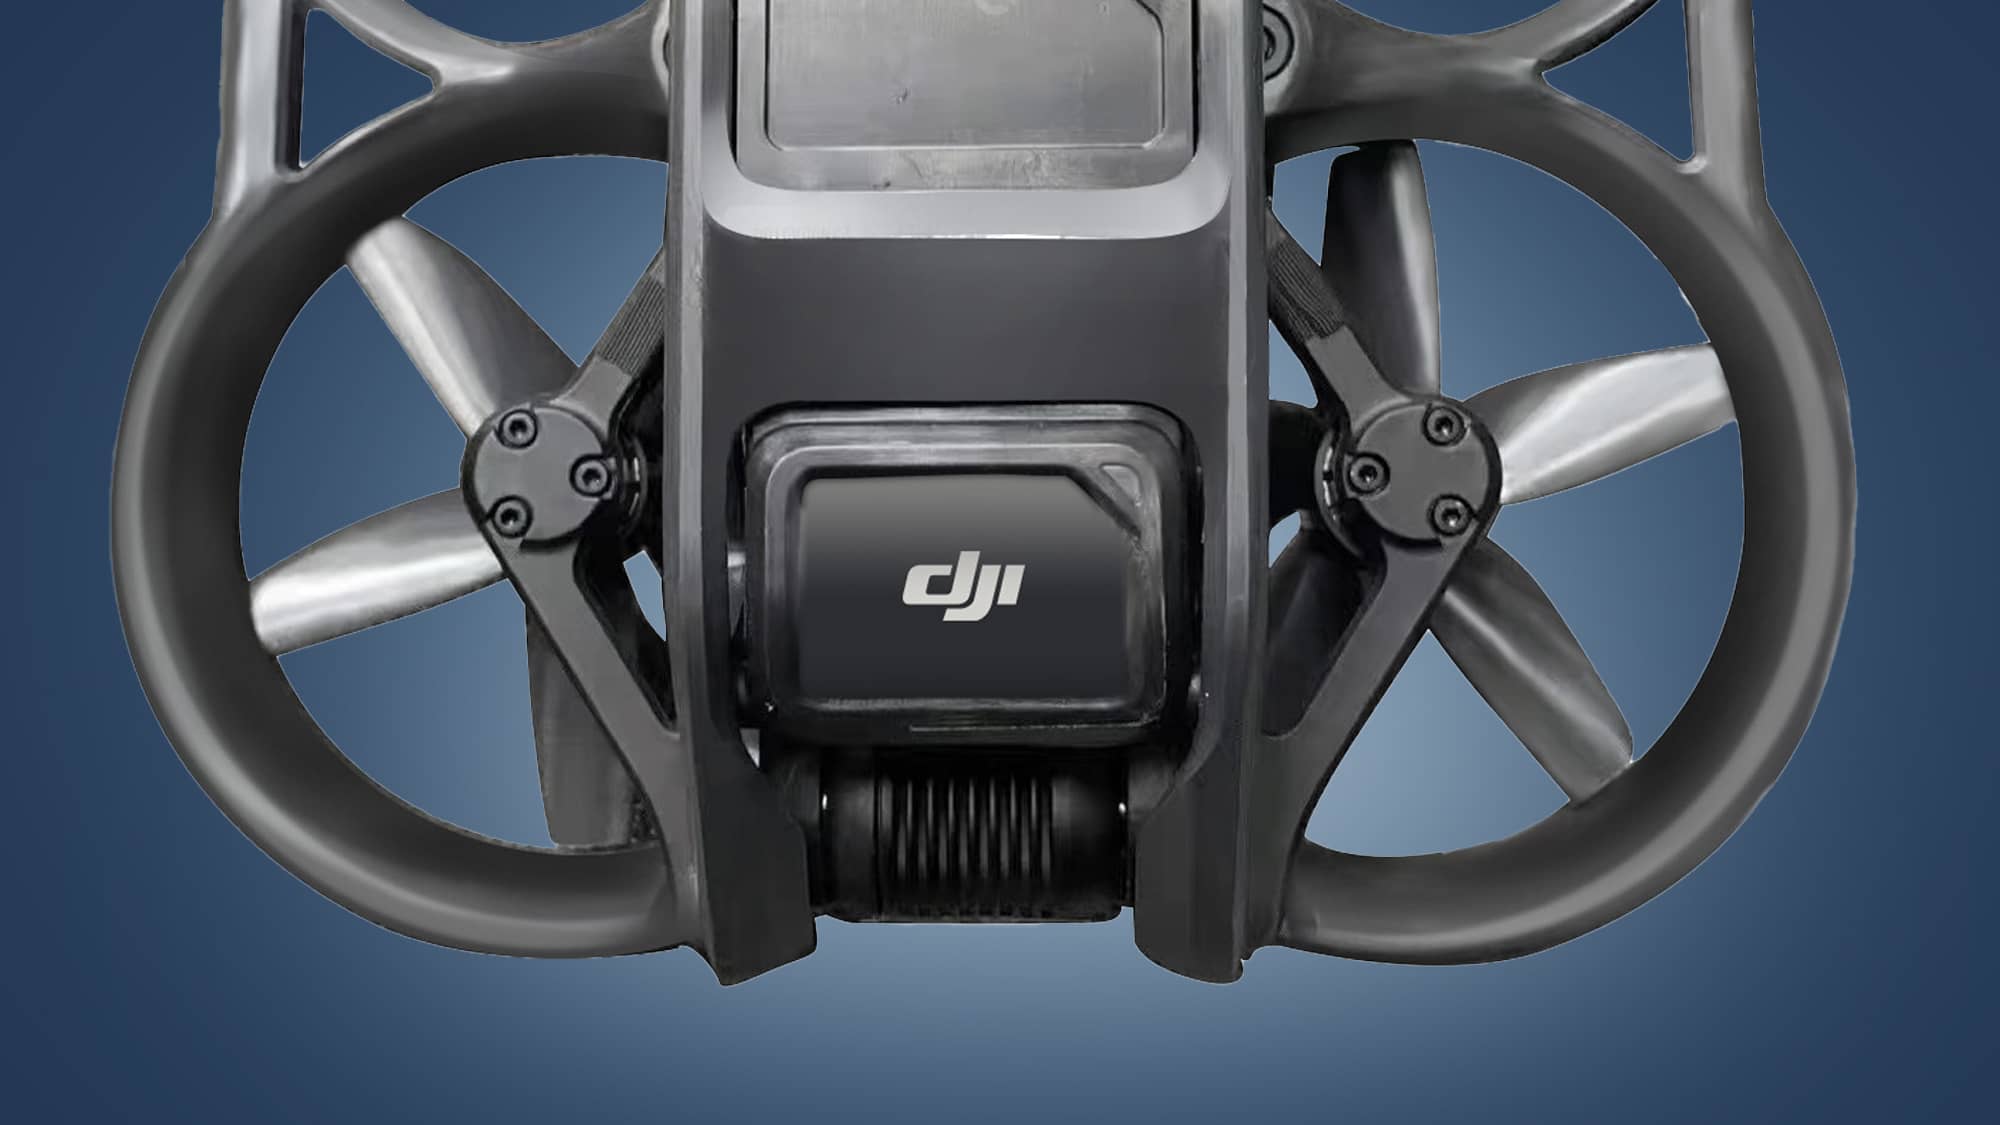 A leaked image of the DJI Avata drone